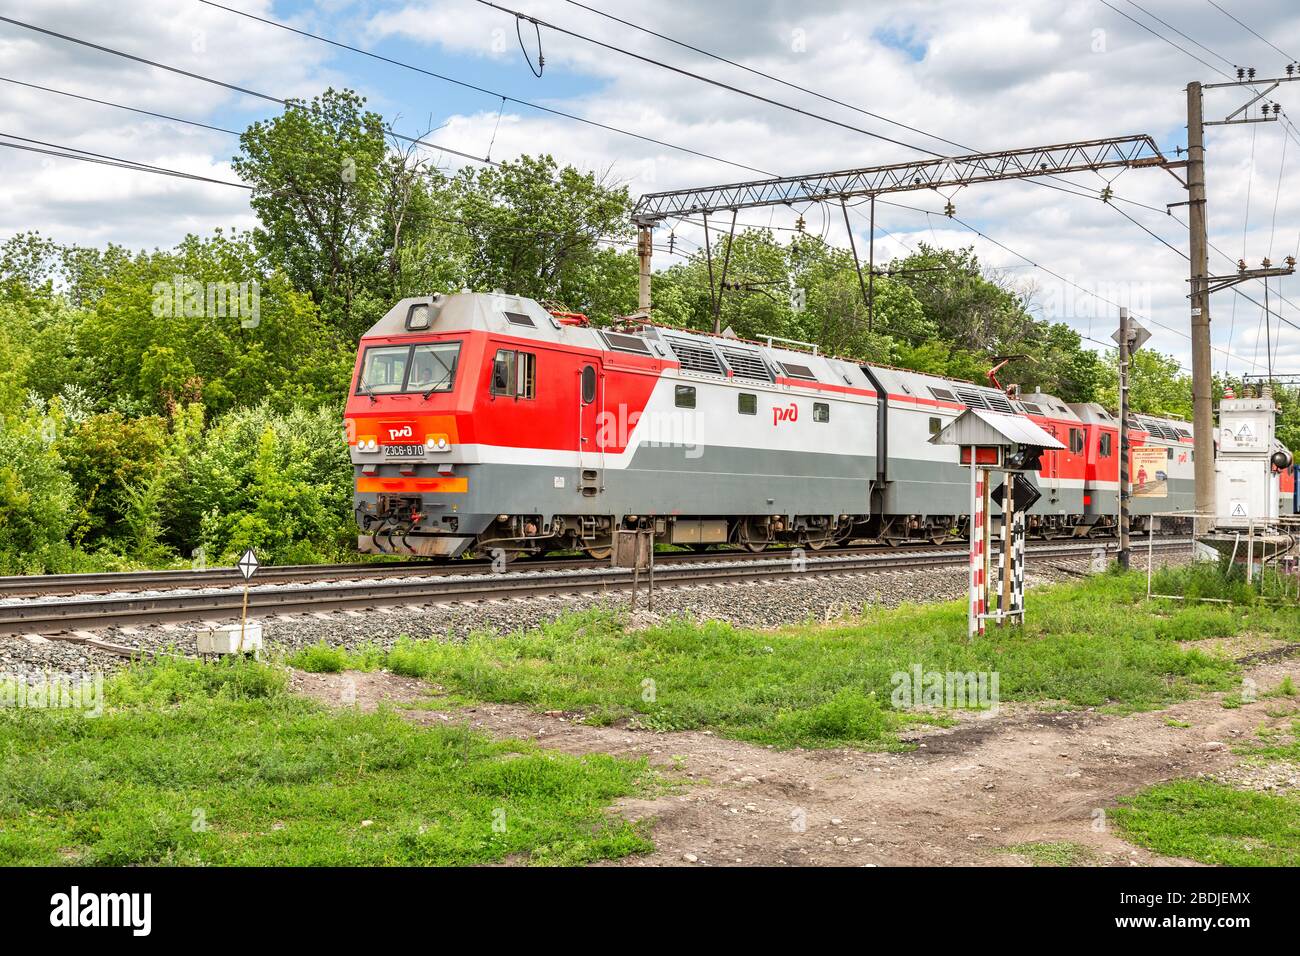 Penza, Russia - July 6, 2019: Russian electric locomotive with freight  train. Cargo train logistic of Russian railway Stock Photo